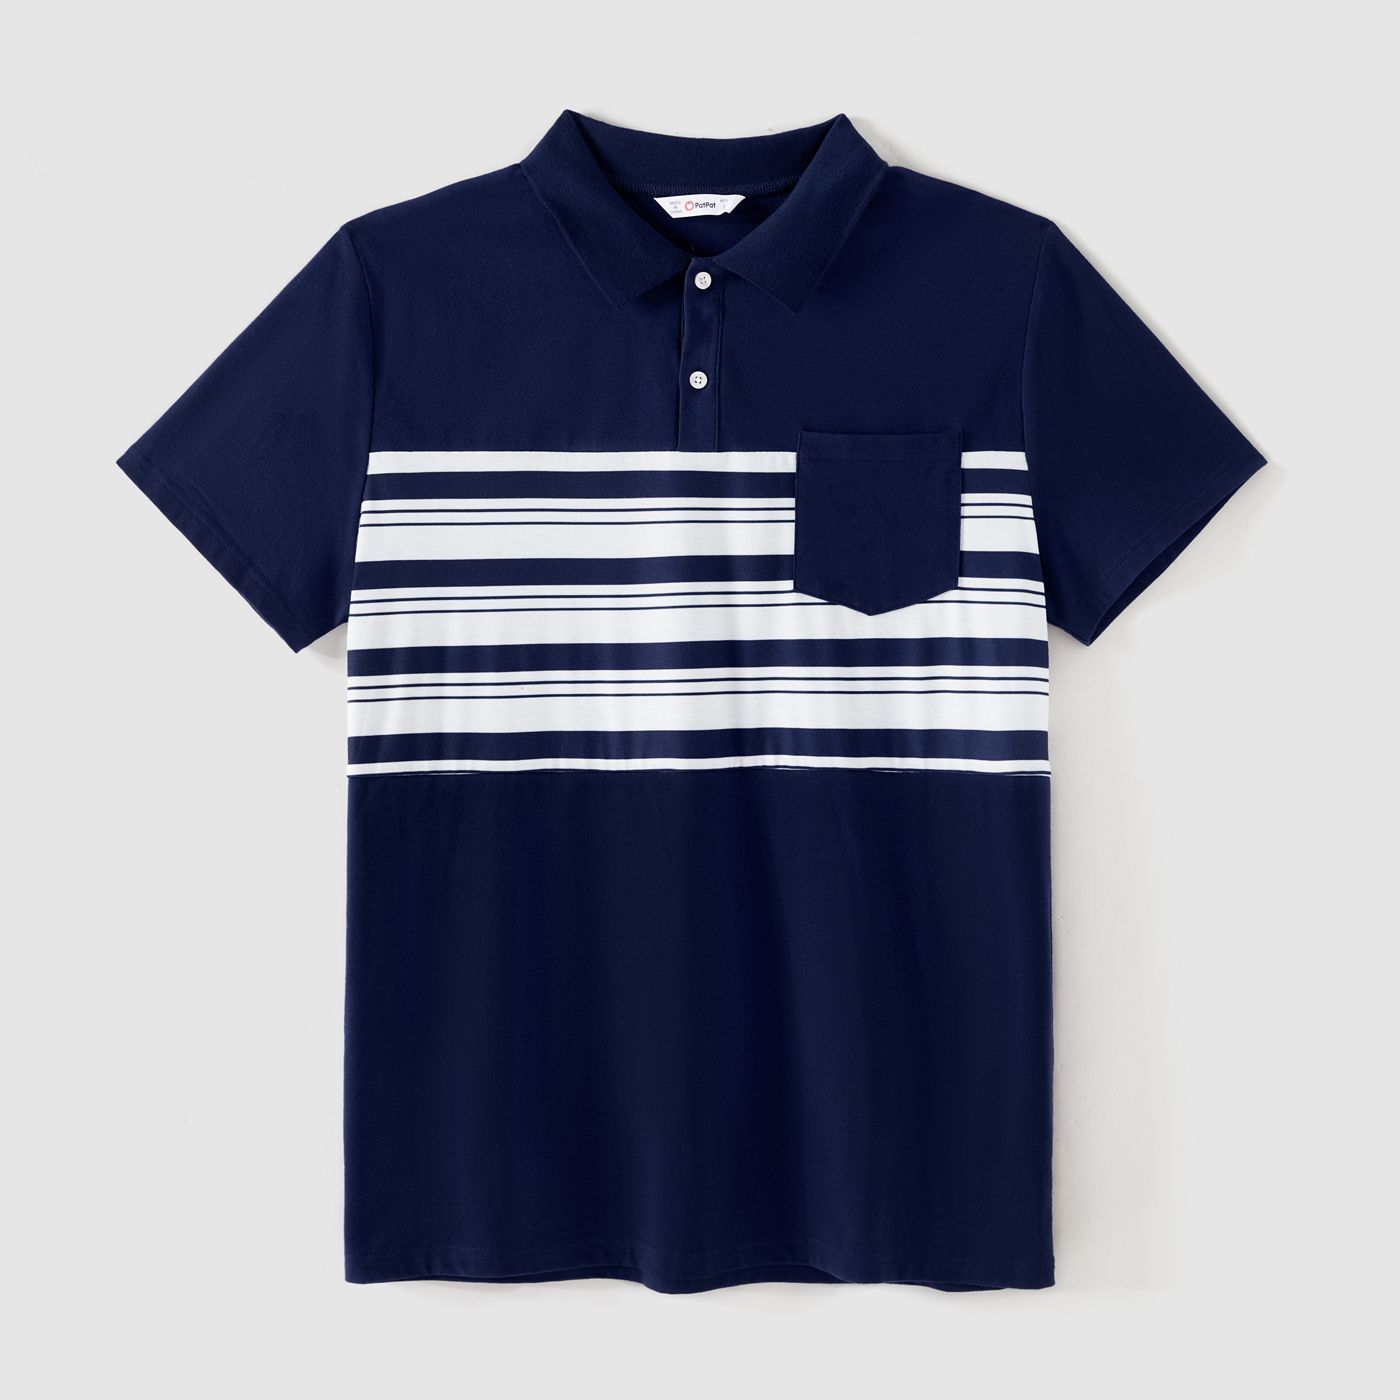 Family Matching Cotton Short-sleeve Spliced Chevron Pattern Dresses And Striped Polo Shirts Sets